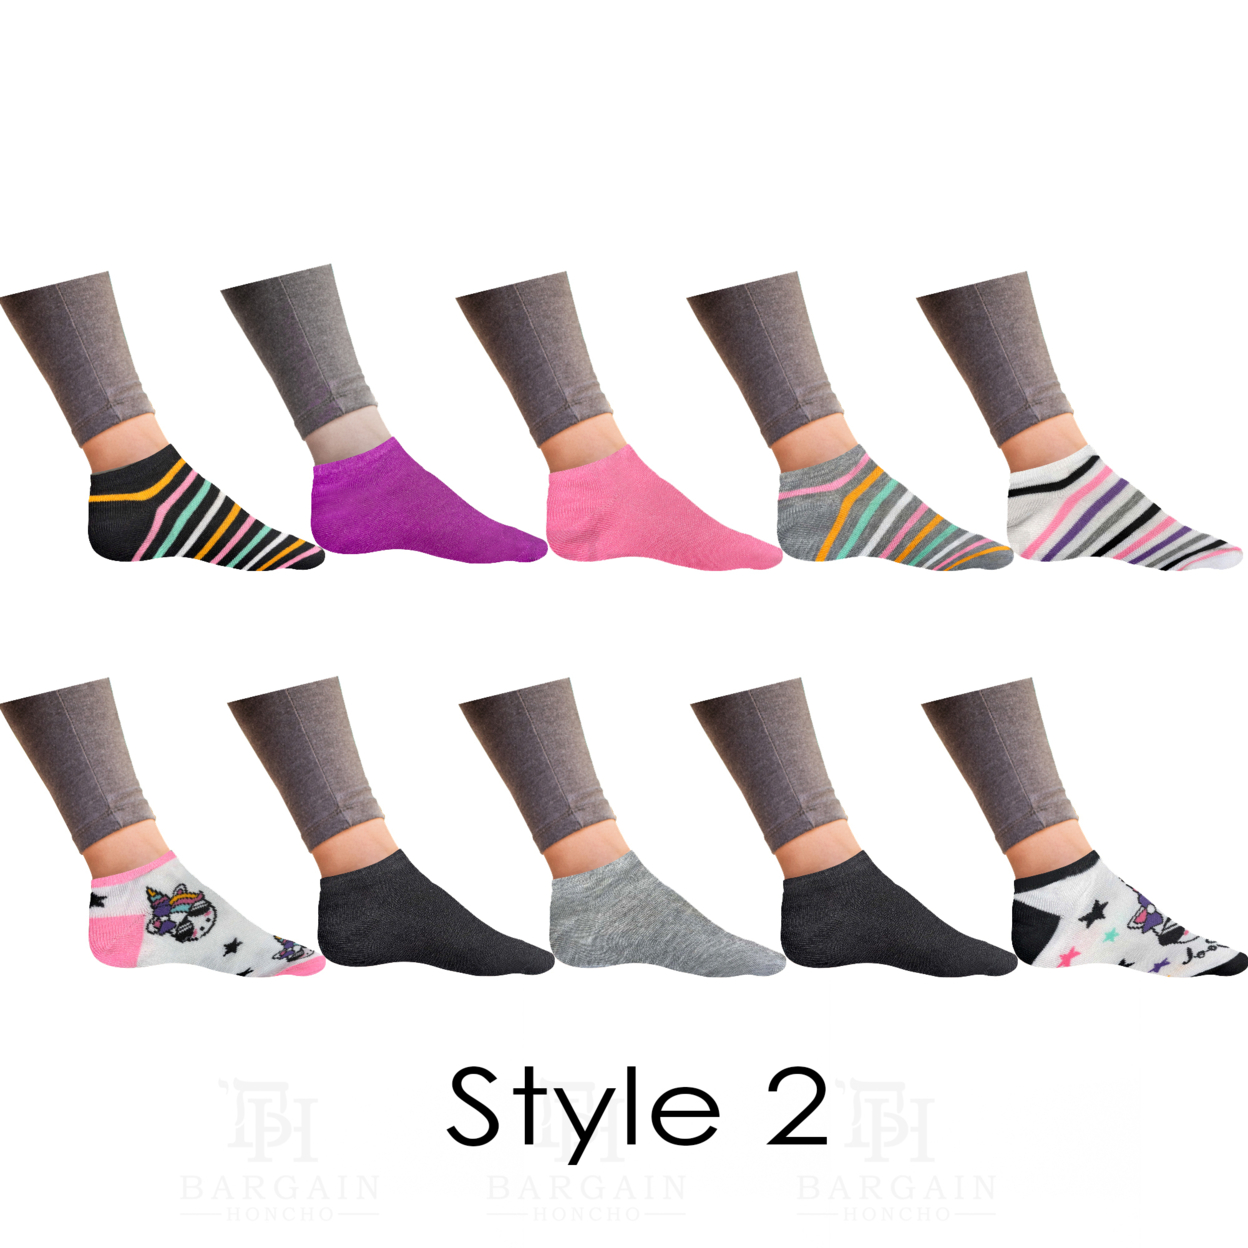 20-Pairs: Women’s Breathable Colorful Fun No Show Low Cut Ankle Socks - 1 & 5